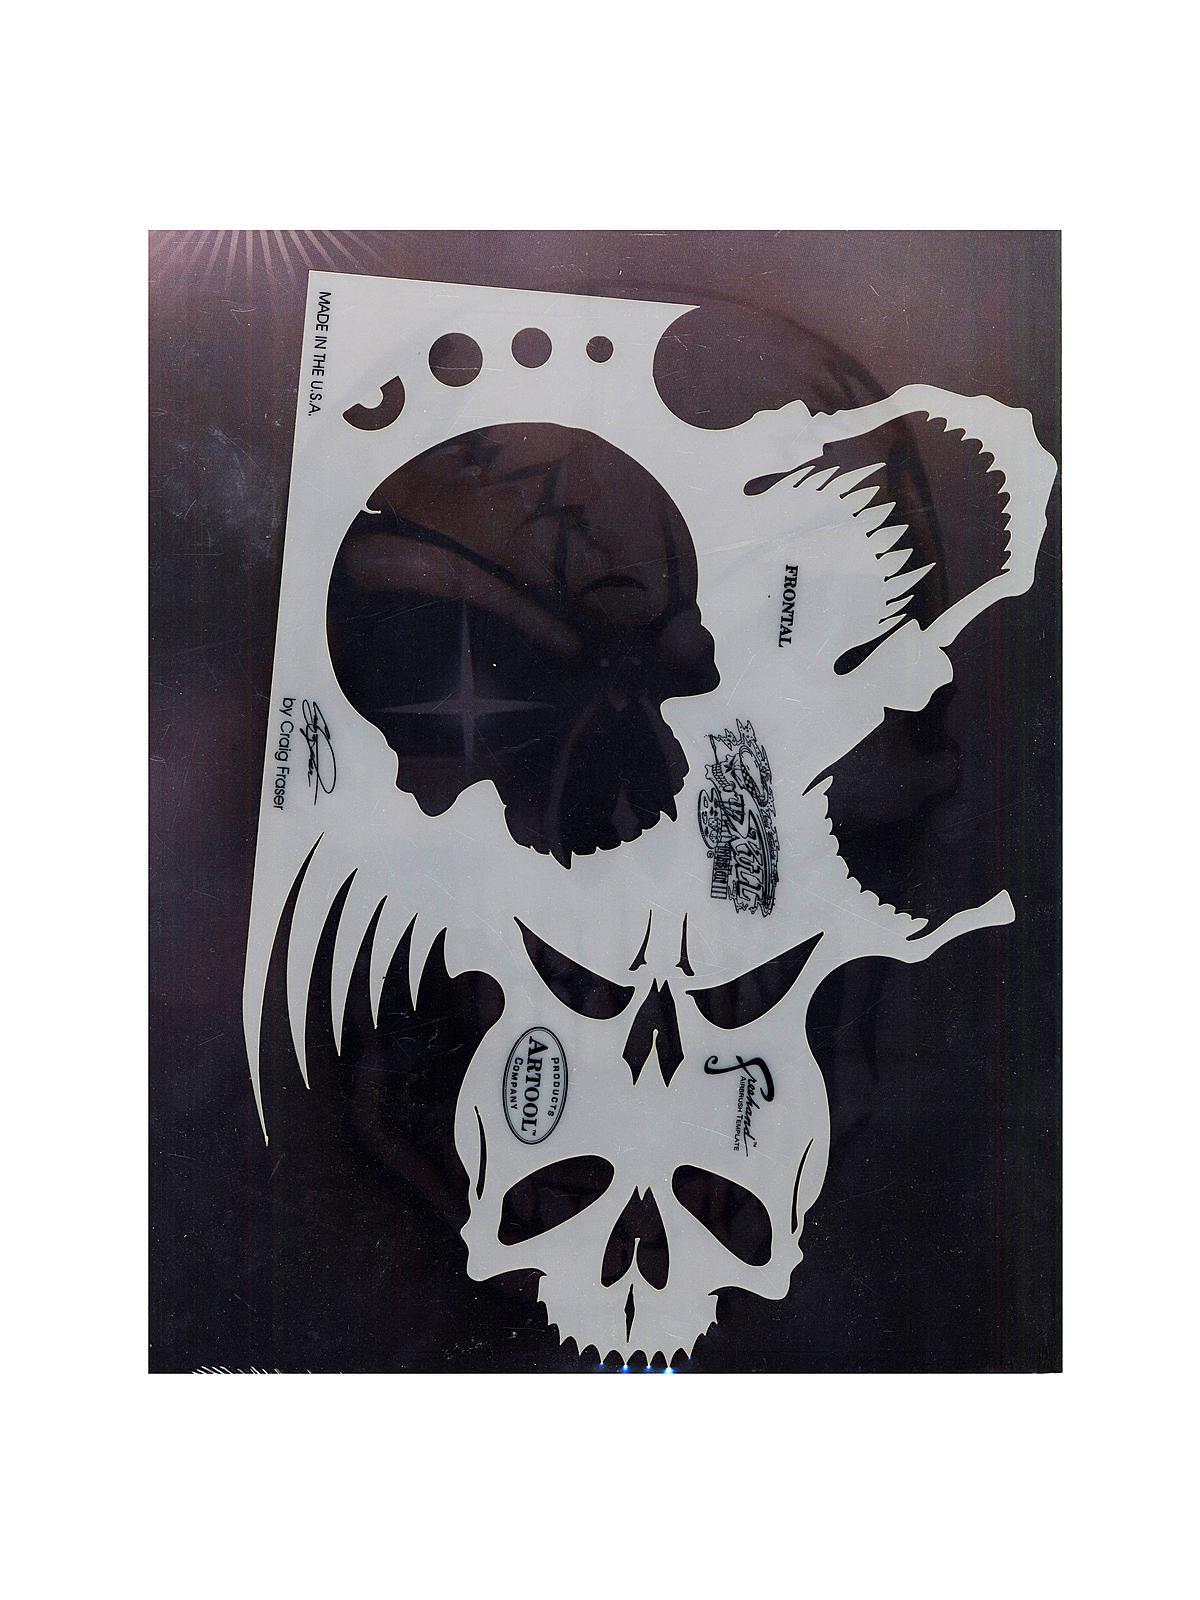 Skull Master Freehand Airbrush Templates By Craig Fraser 7 In. X 9 3 4 In. The Frontal